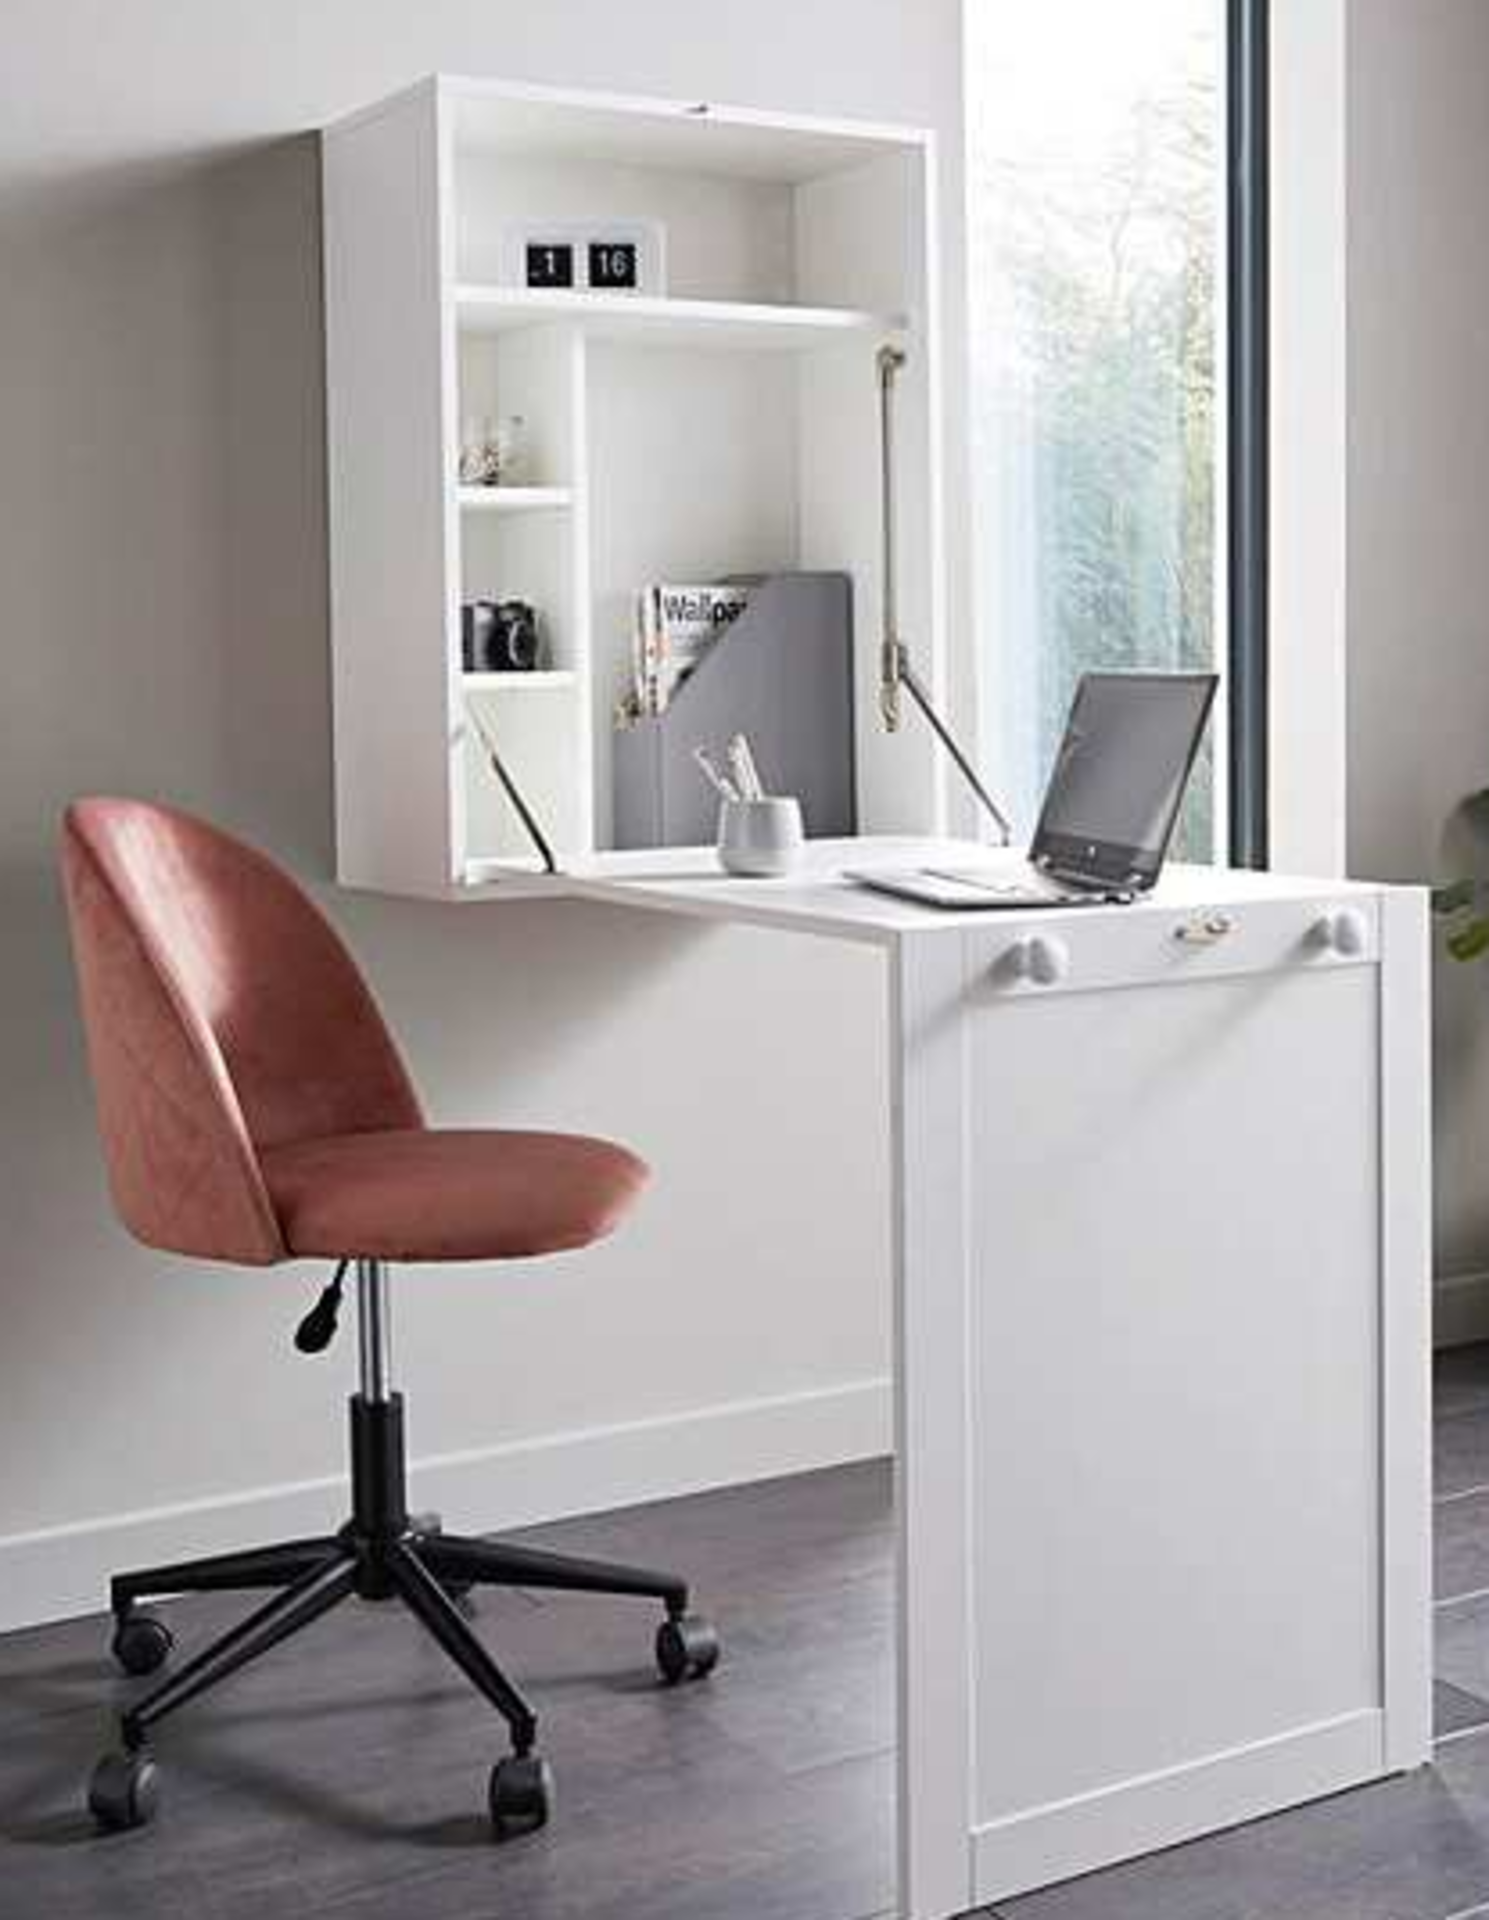 NEW & BOXED Klara Office Chair - BLUSH. RRP £119 EACH. The Klara Office Chair is a luxurious and